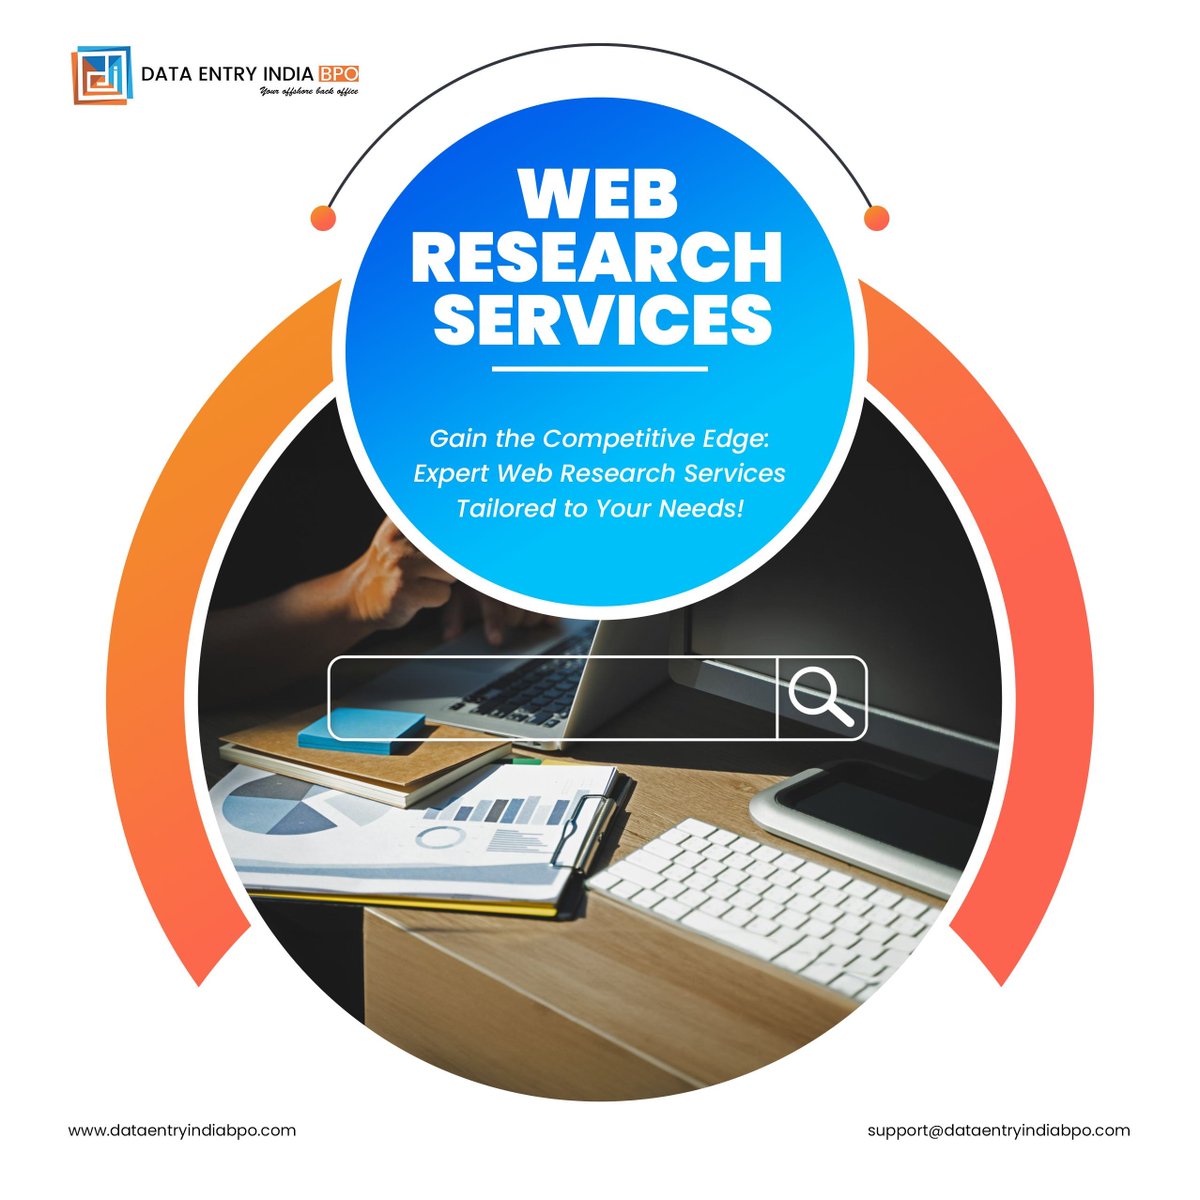 Transform raw information into actionable insights with our reliable web research services. Maximize your potential, starting now!

Read more: dataentryindiabpo.com/web-research-s…

Email us: support@dataentryindiabpo.com

#webresearch #competitors #bposolutions #BPOservices #business